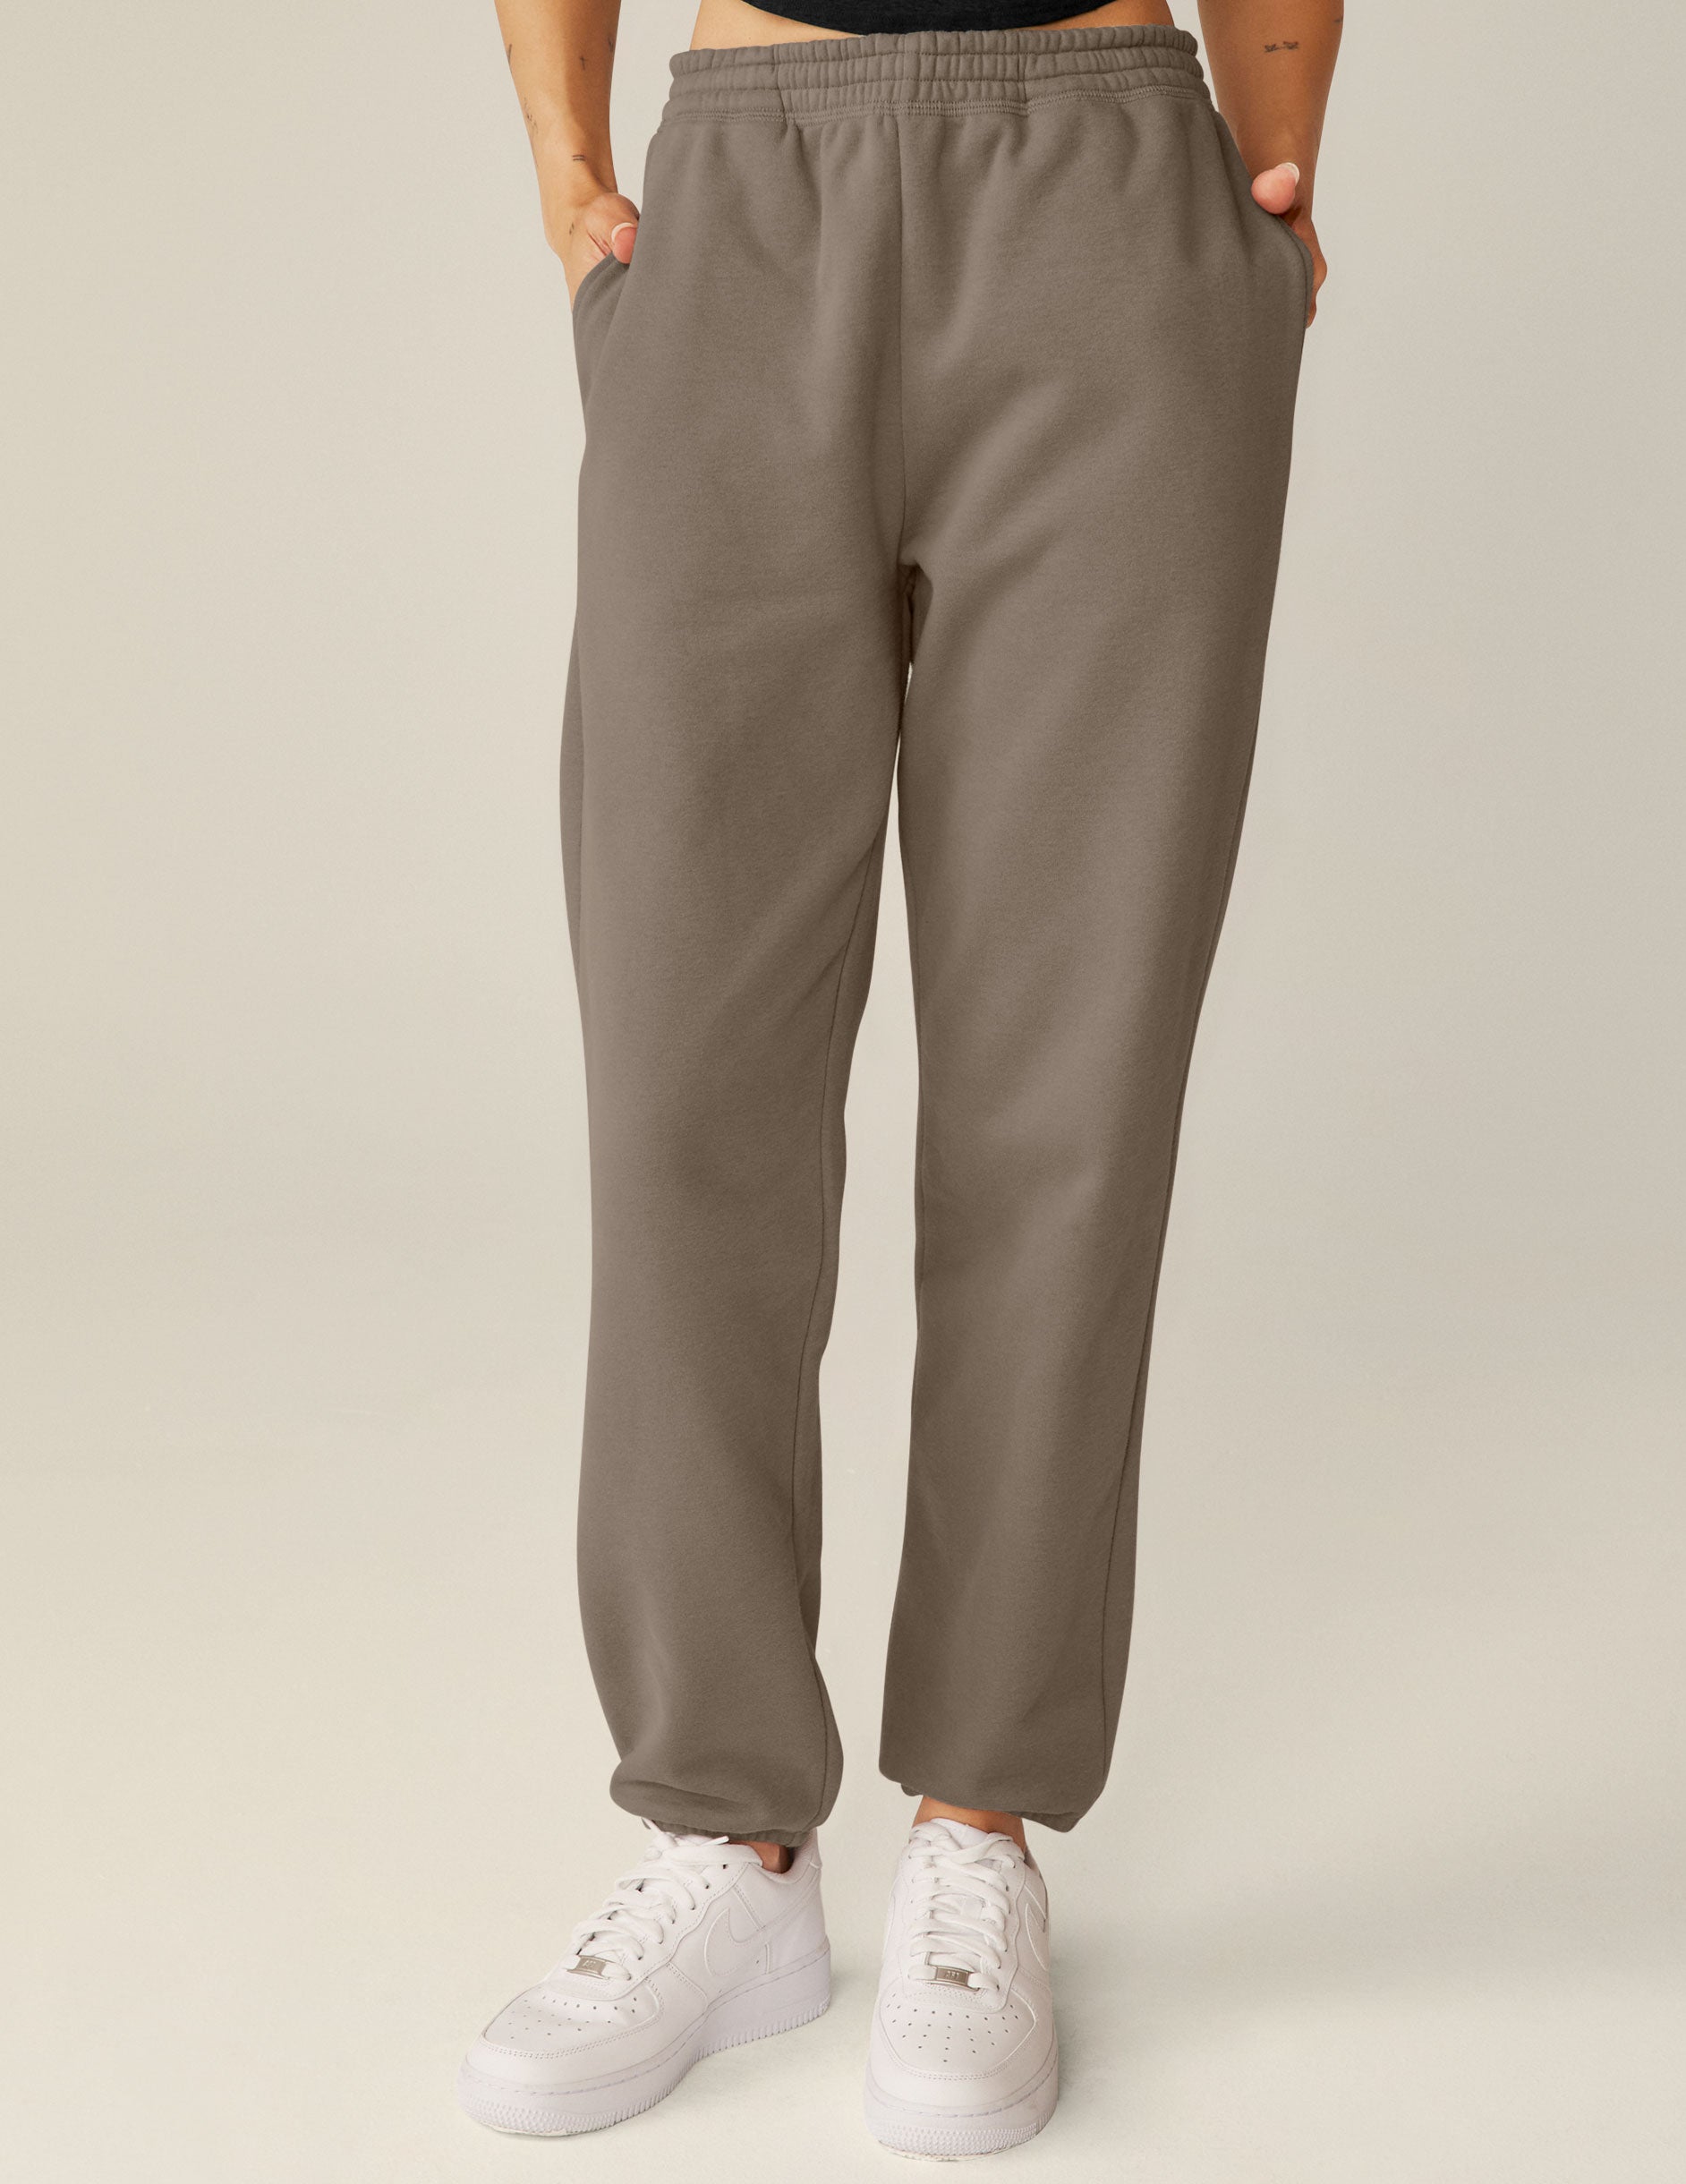 brown jogger pants with a drawstring on internal waistband. 